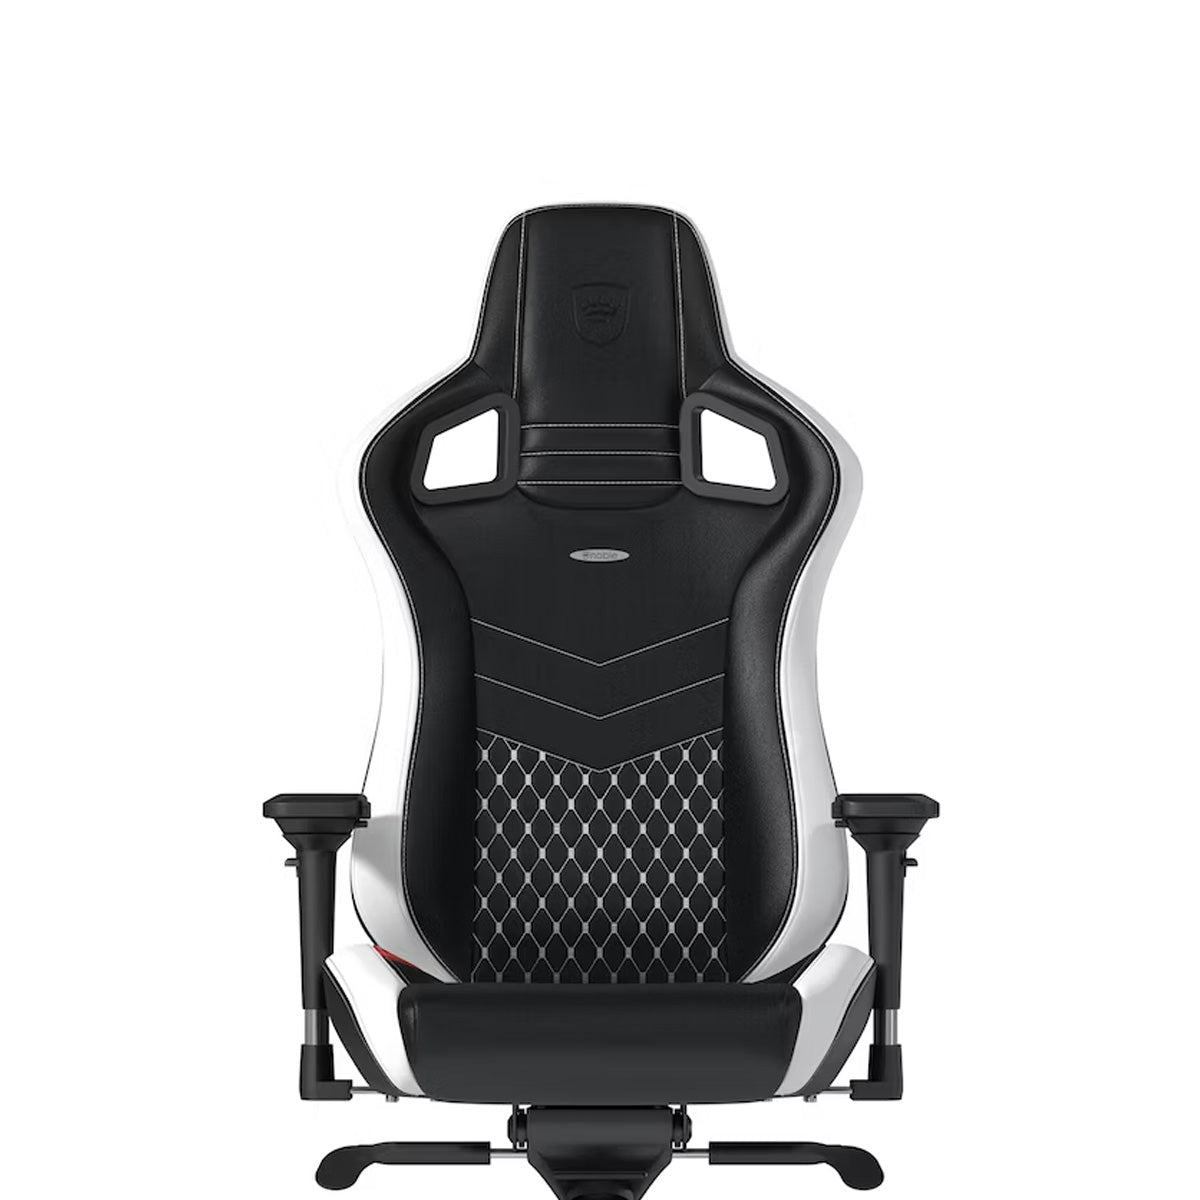 Noblechairs EPIC Series Real Leather - FREE Shipping & No Tax